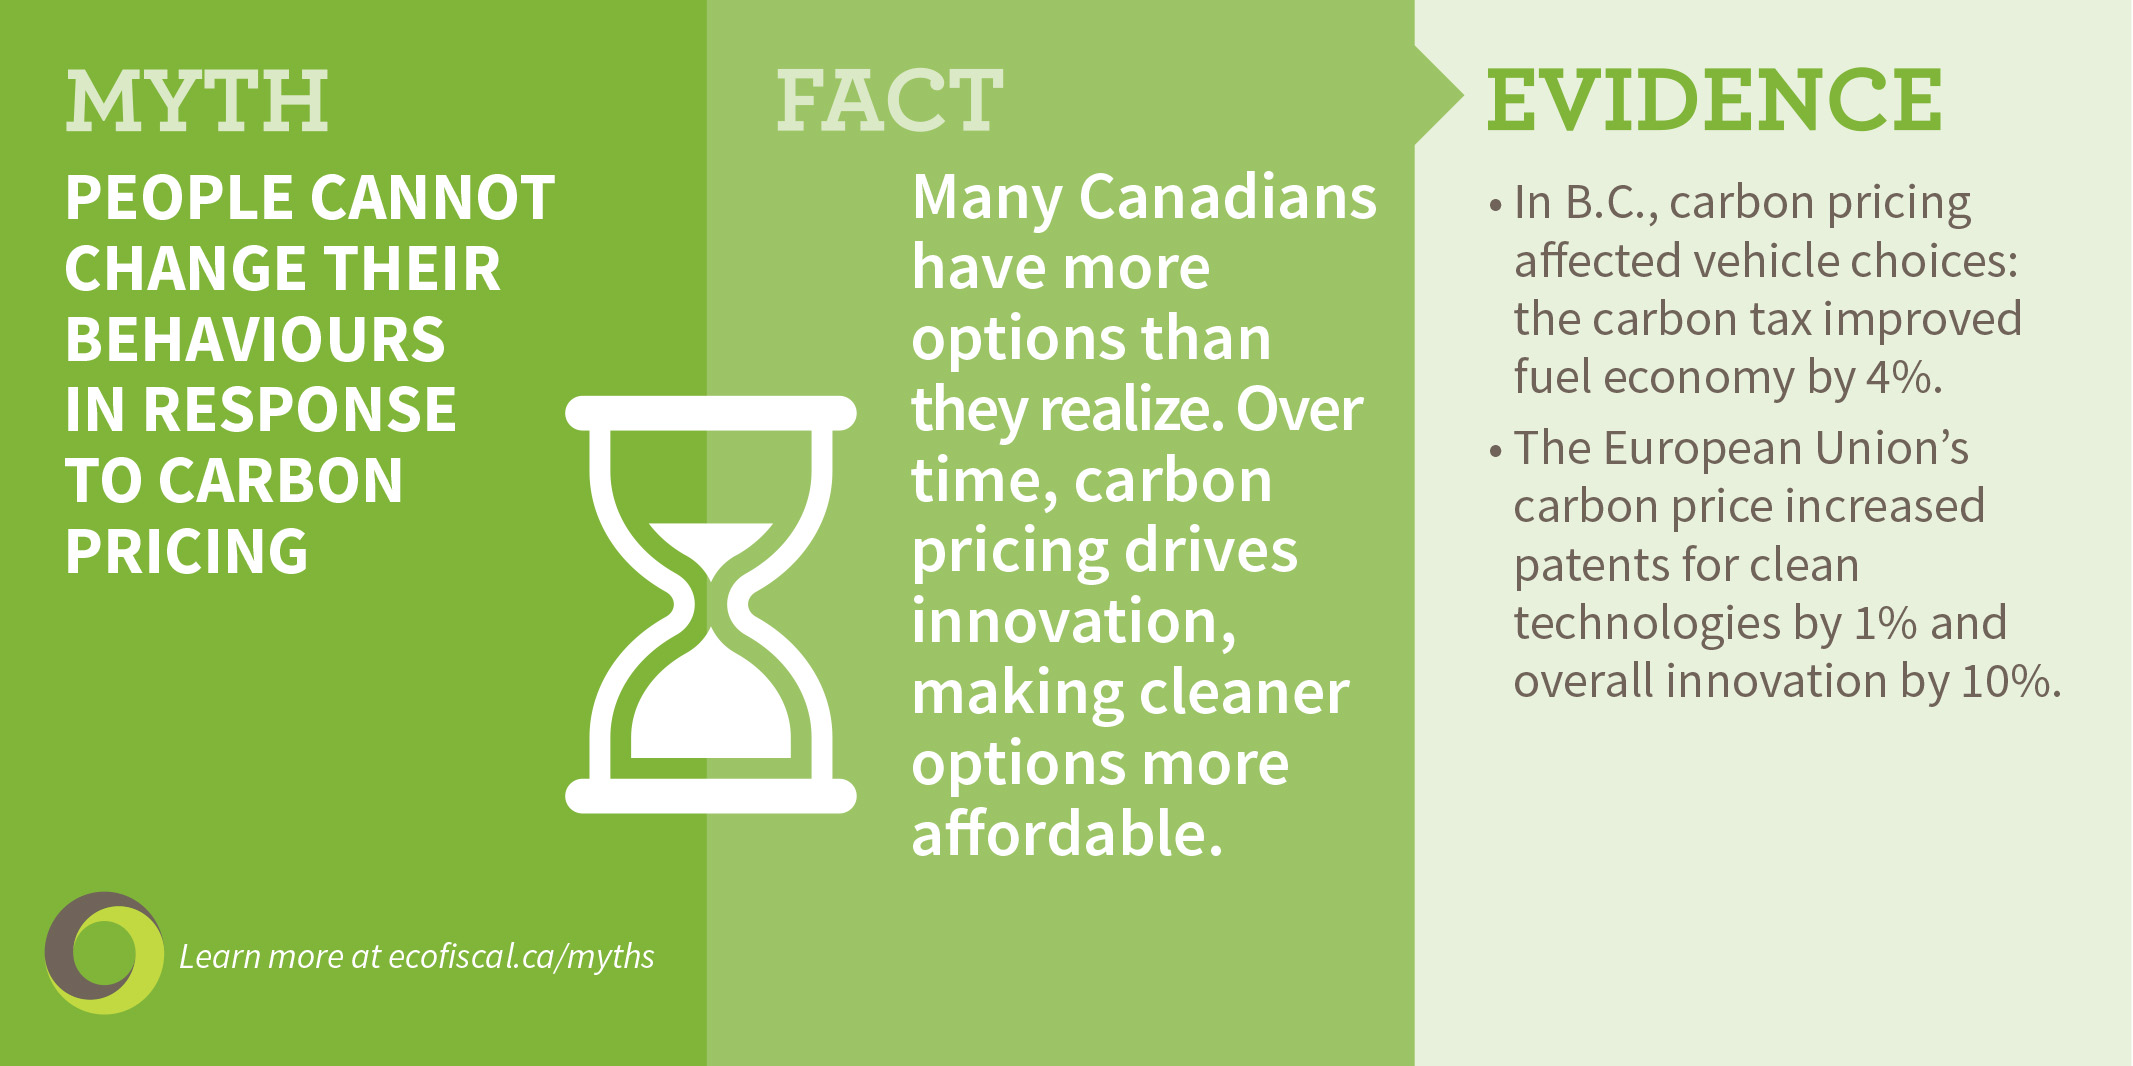 Myth #7: People cannot change their behaviours in response to carbon pricing